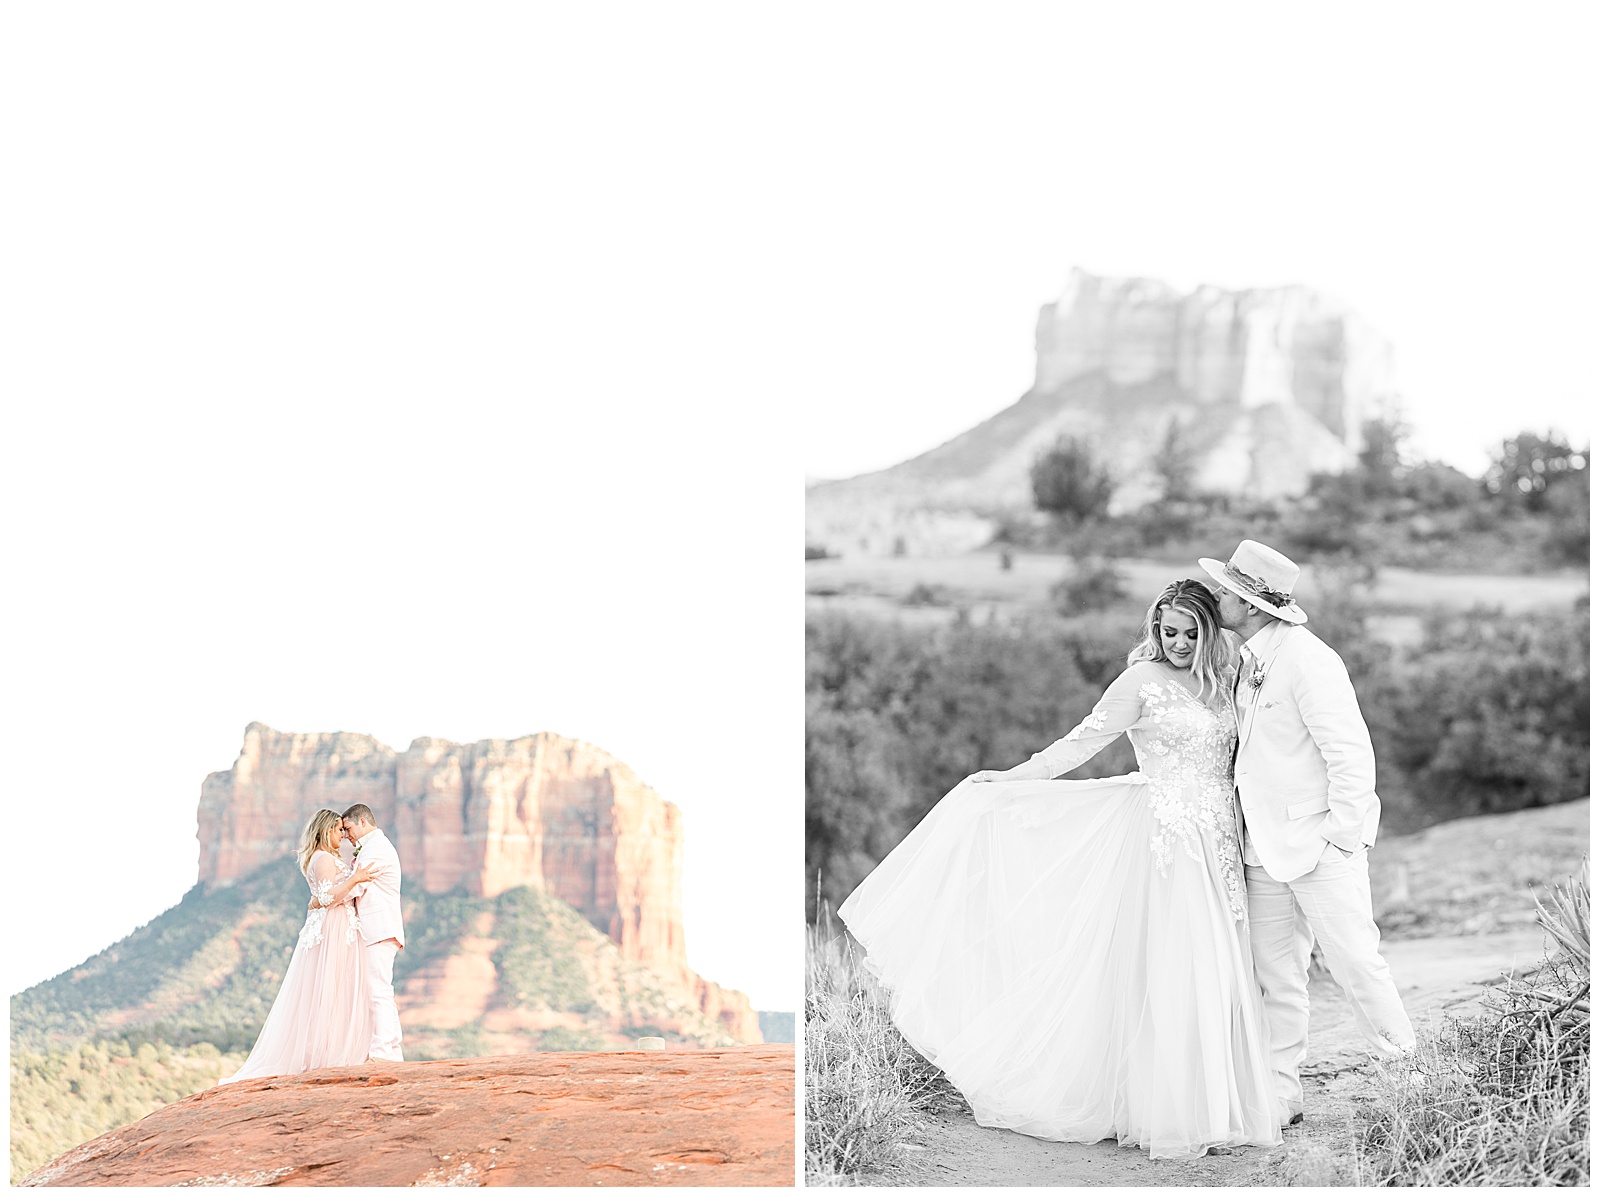 two photos of bride and groom at their elopement 